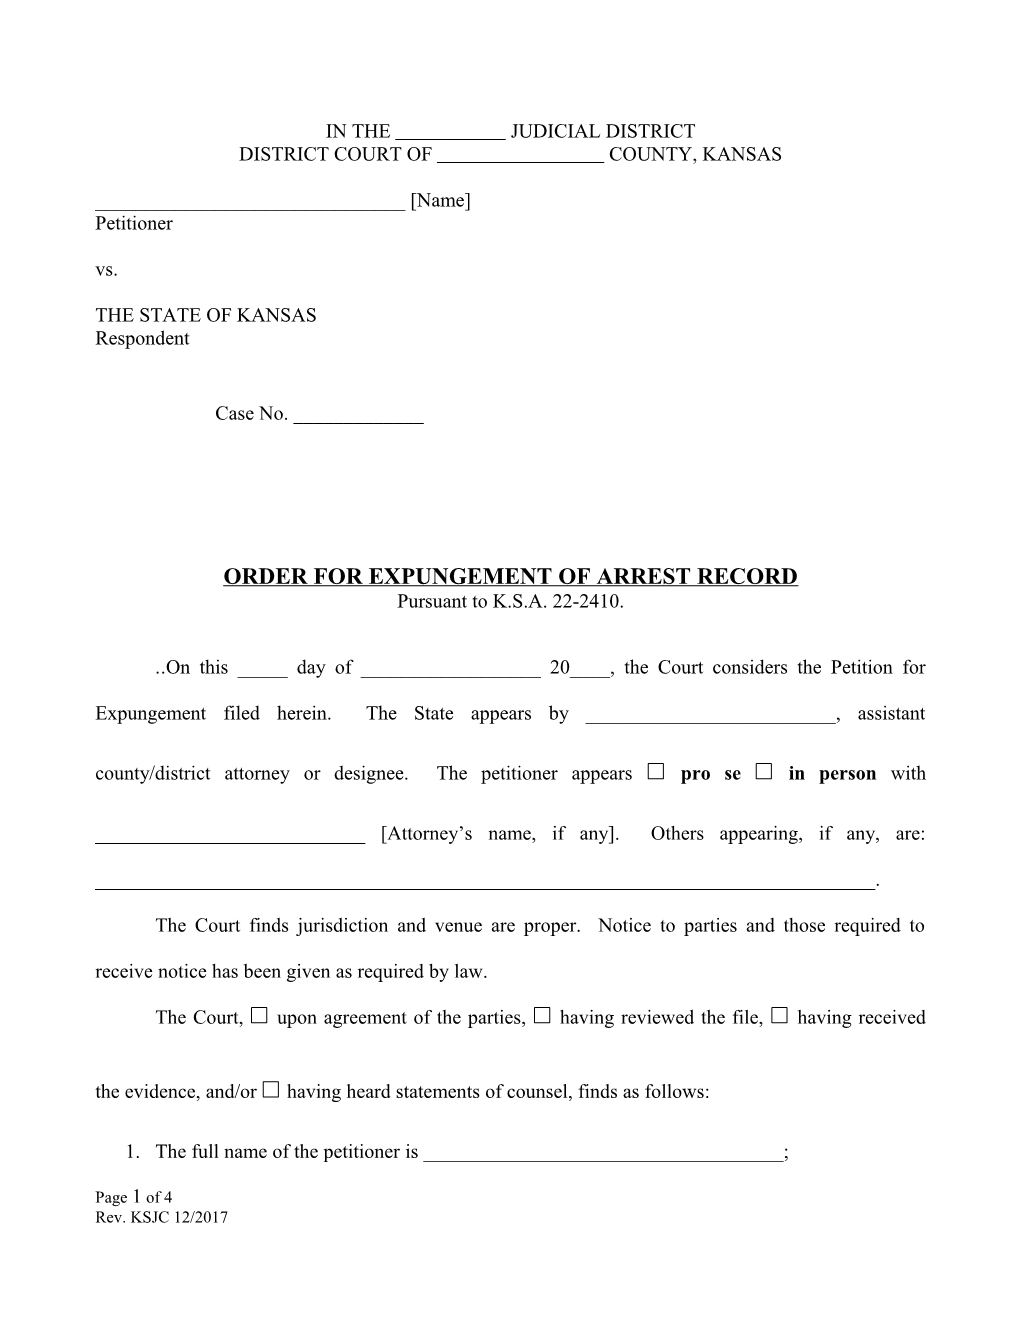 Order for Expungement of Arrest Record